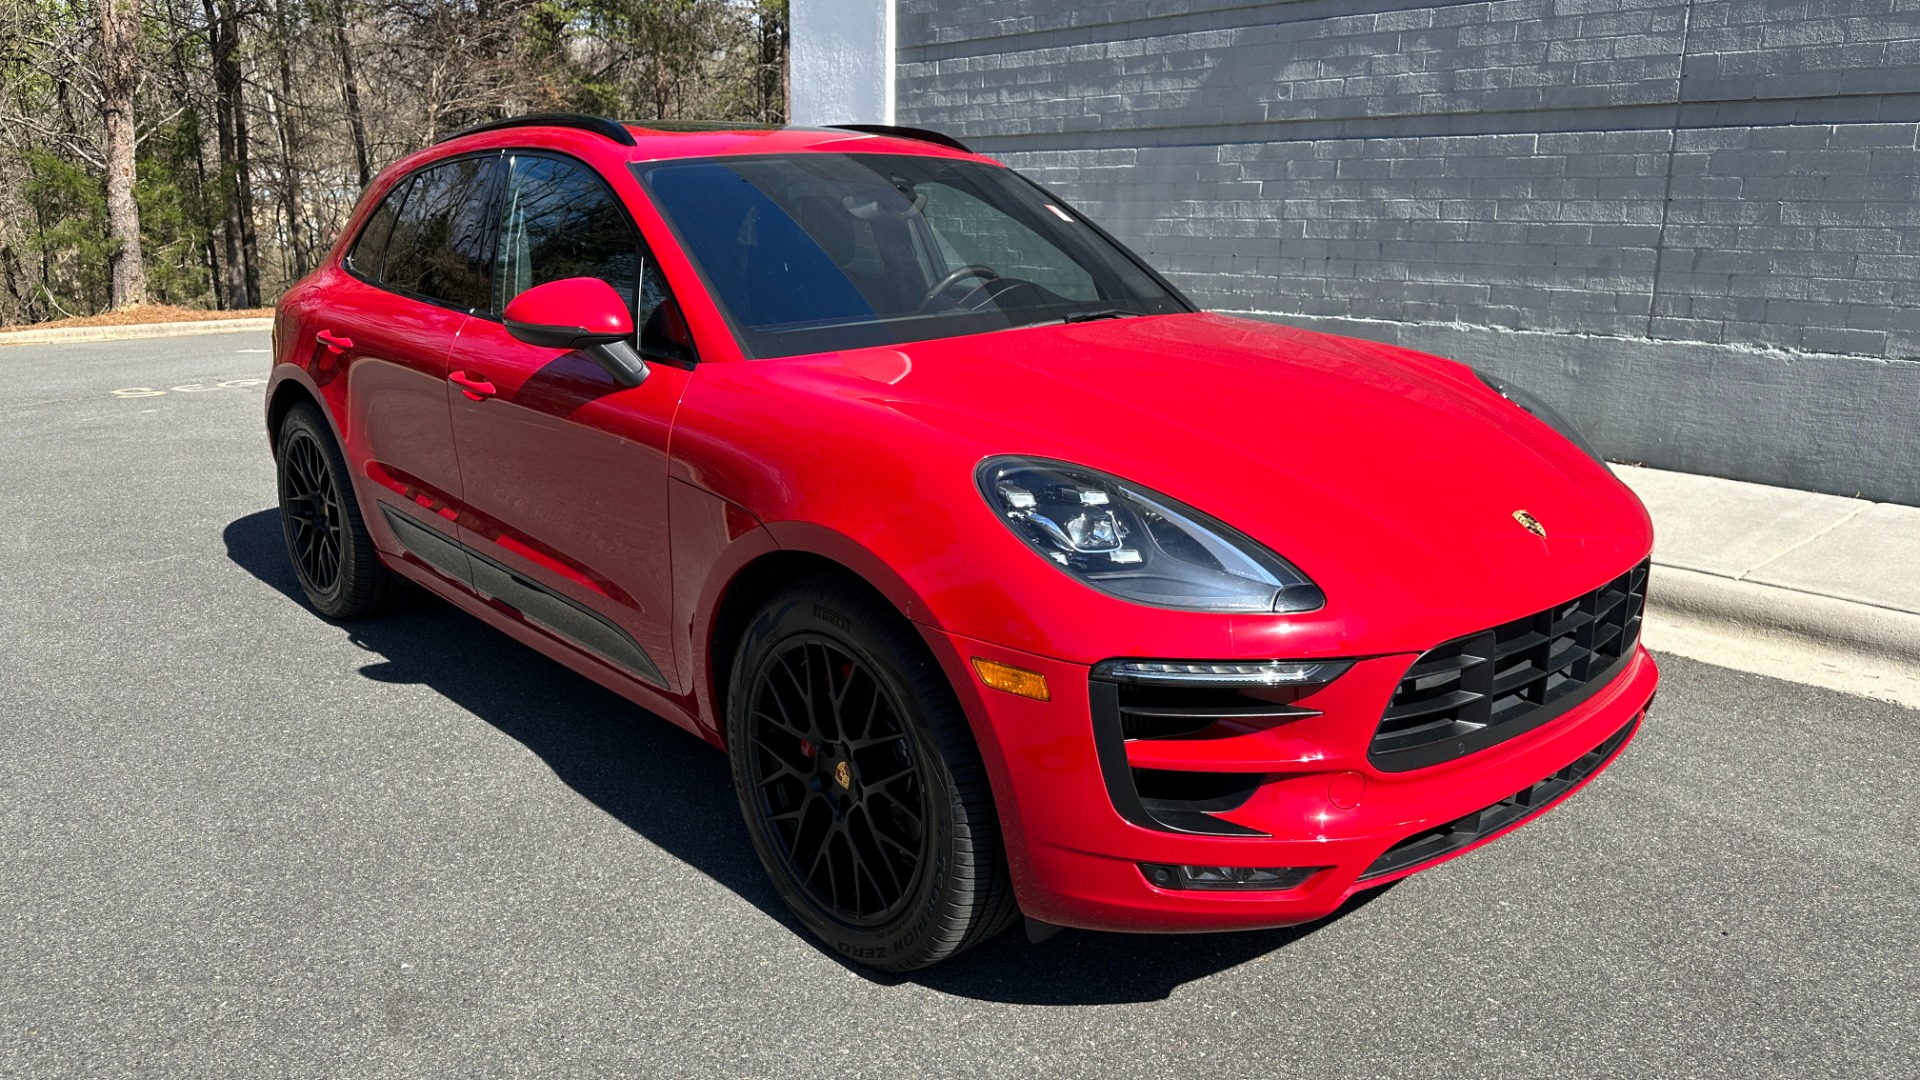 Used 2017 Porsche Macan GTS / CARBON FIBER / GTS INTERIOR / DYNAMIC LIGHTS / BOSE / SPORT WHEEL for sale Sold at Formula Imports in Charlotte NC 28227 2